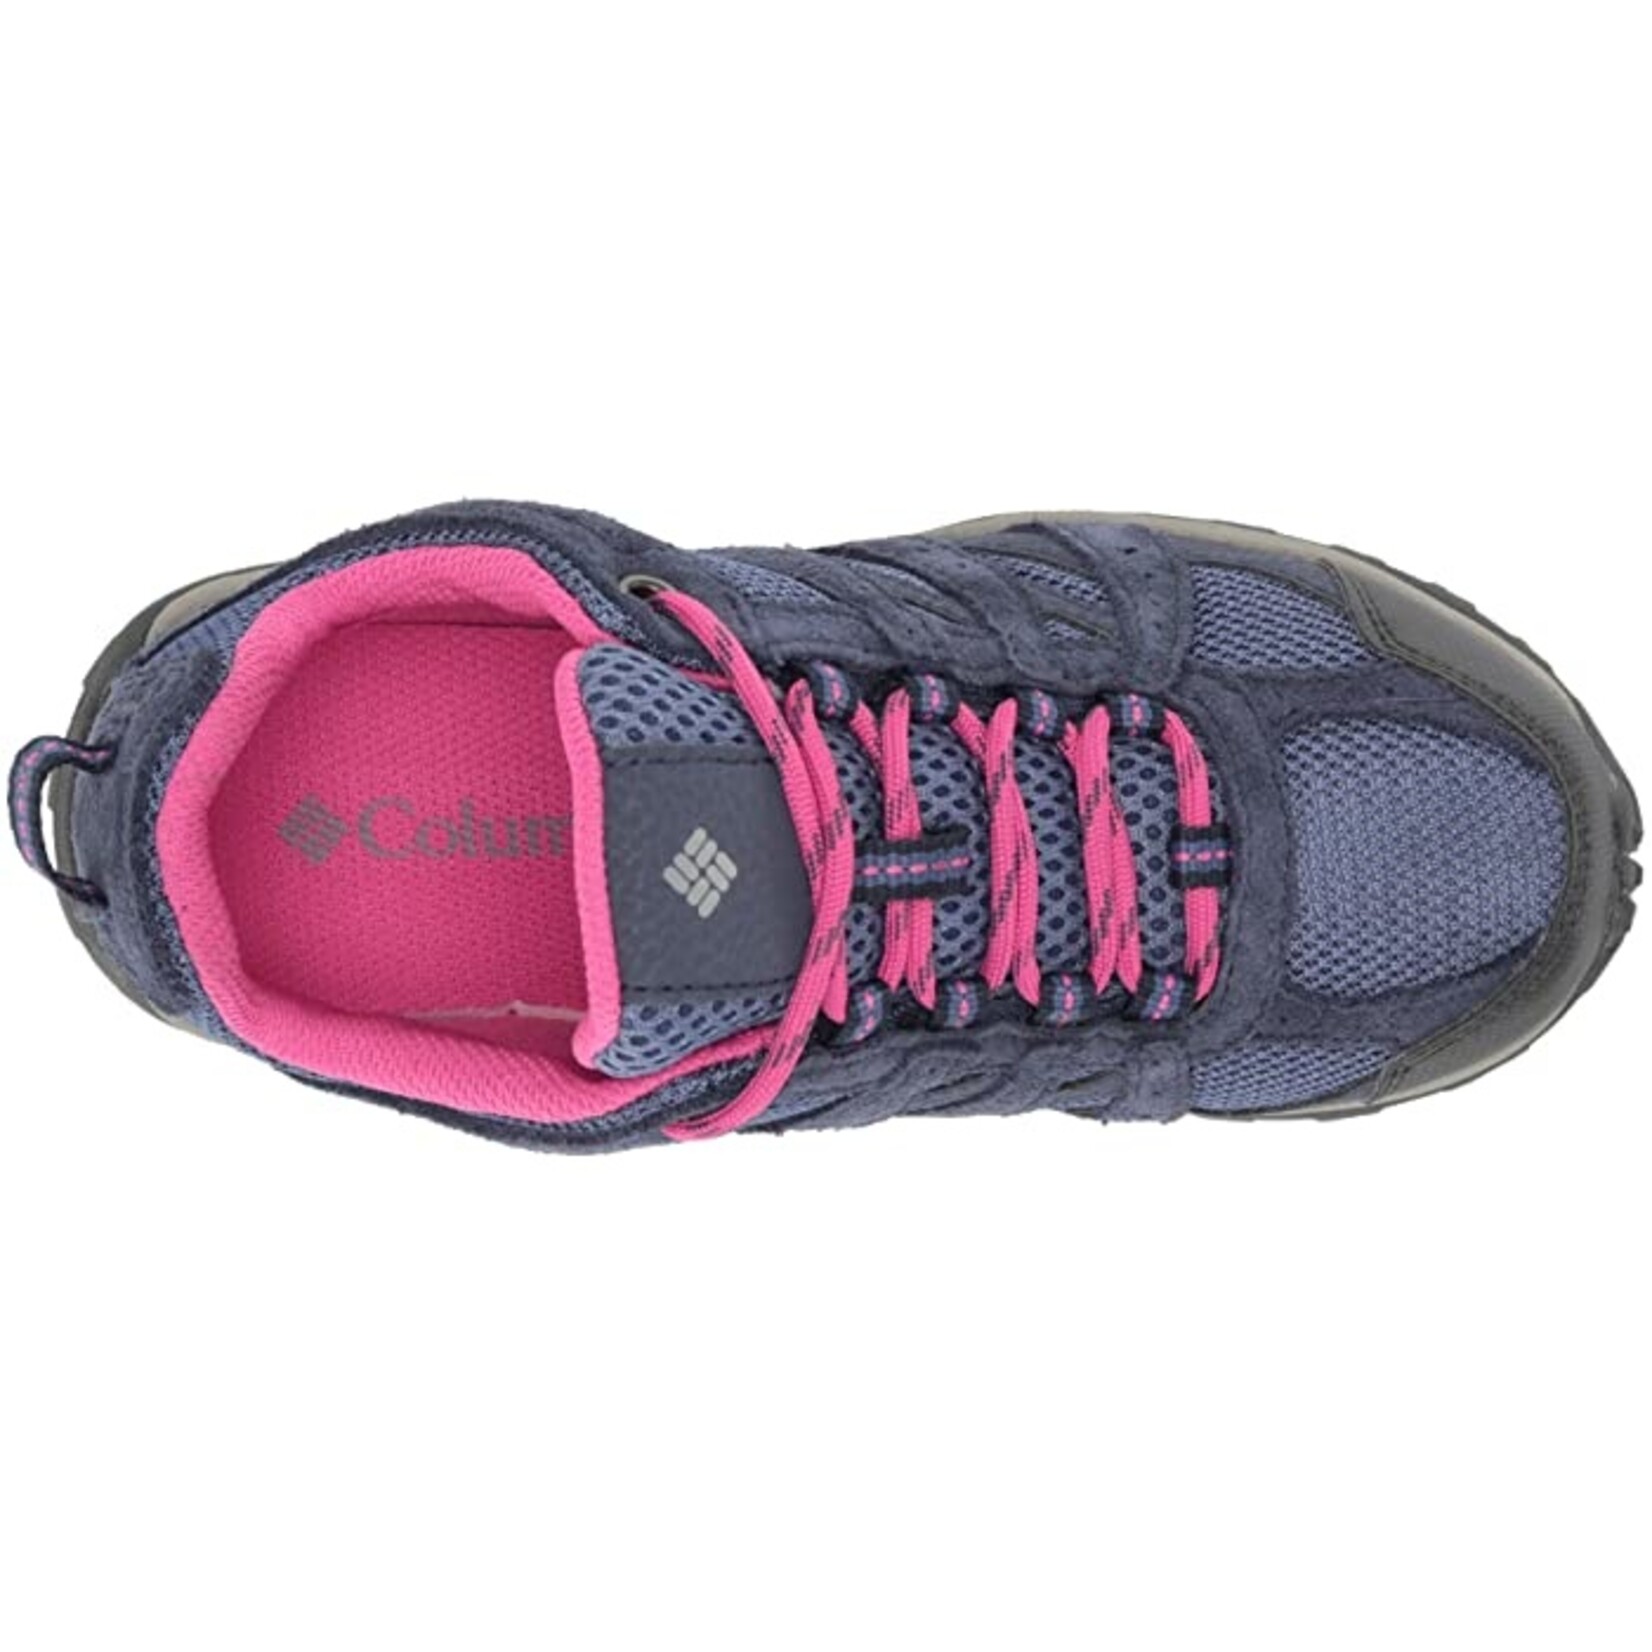 Columbia Youth Redmond Bluebell/Pink Ice Shoe